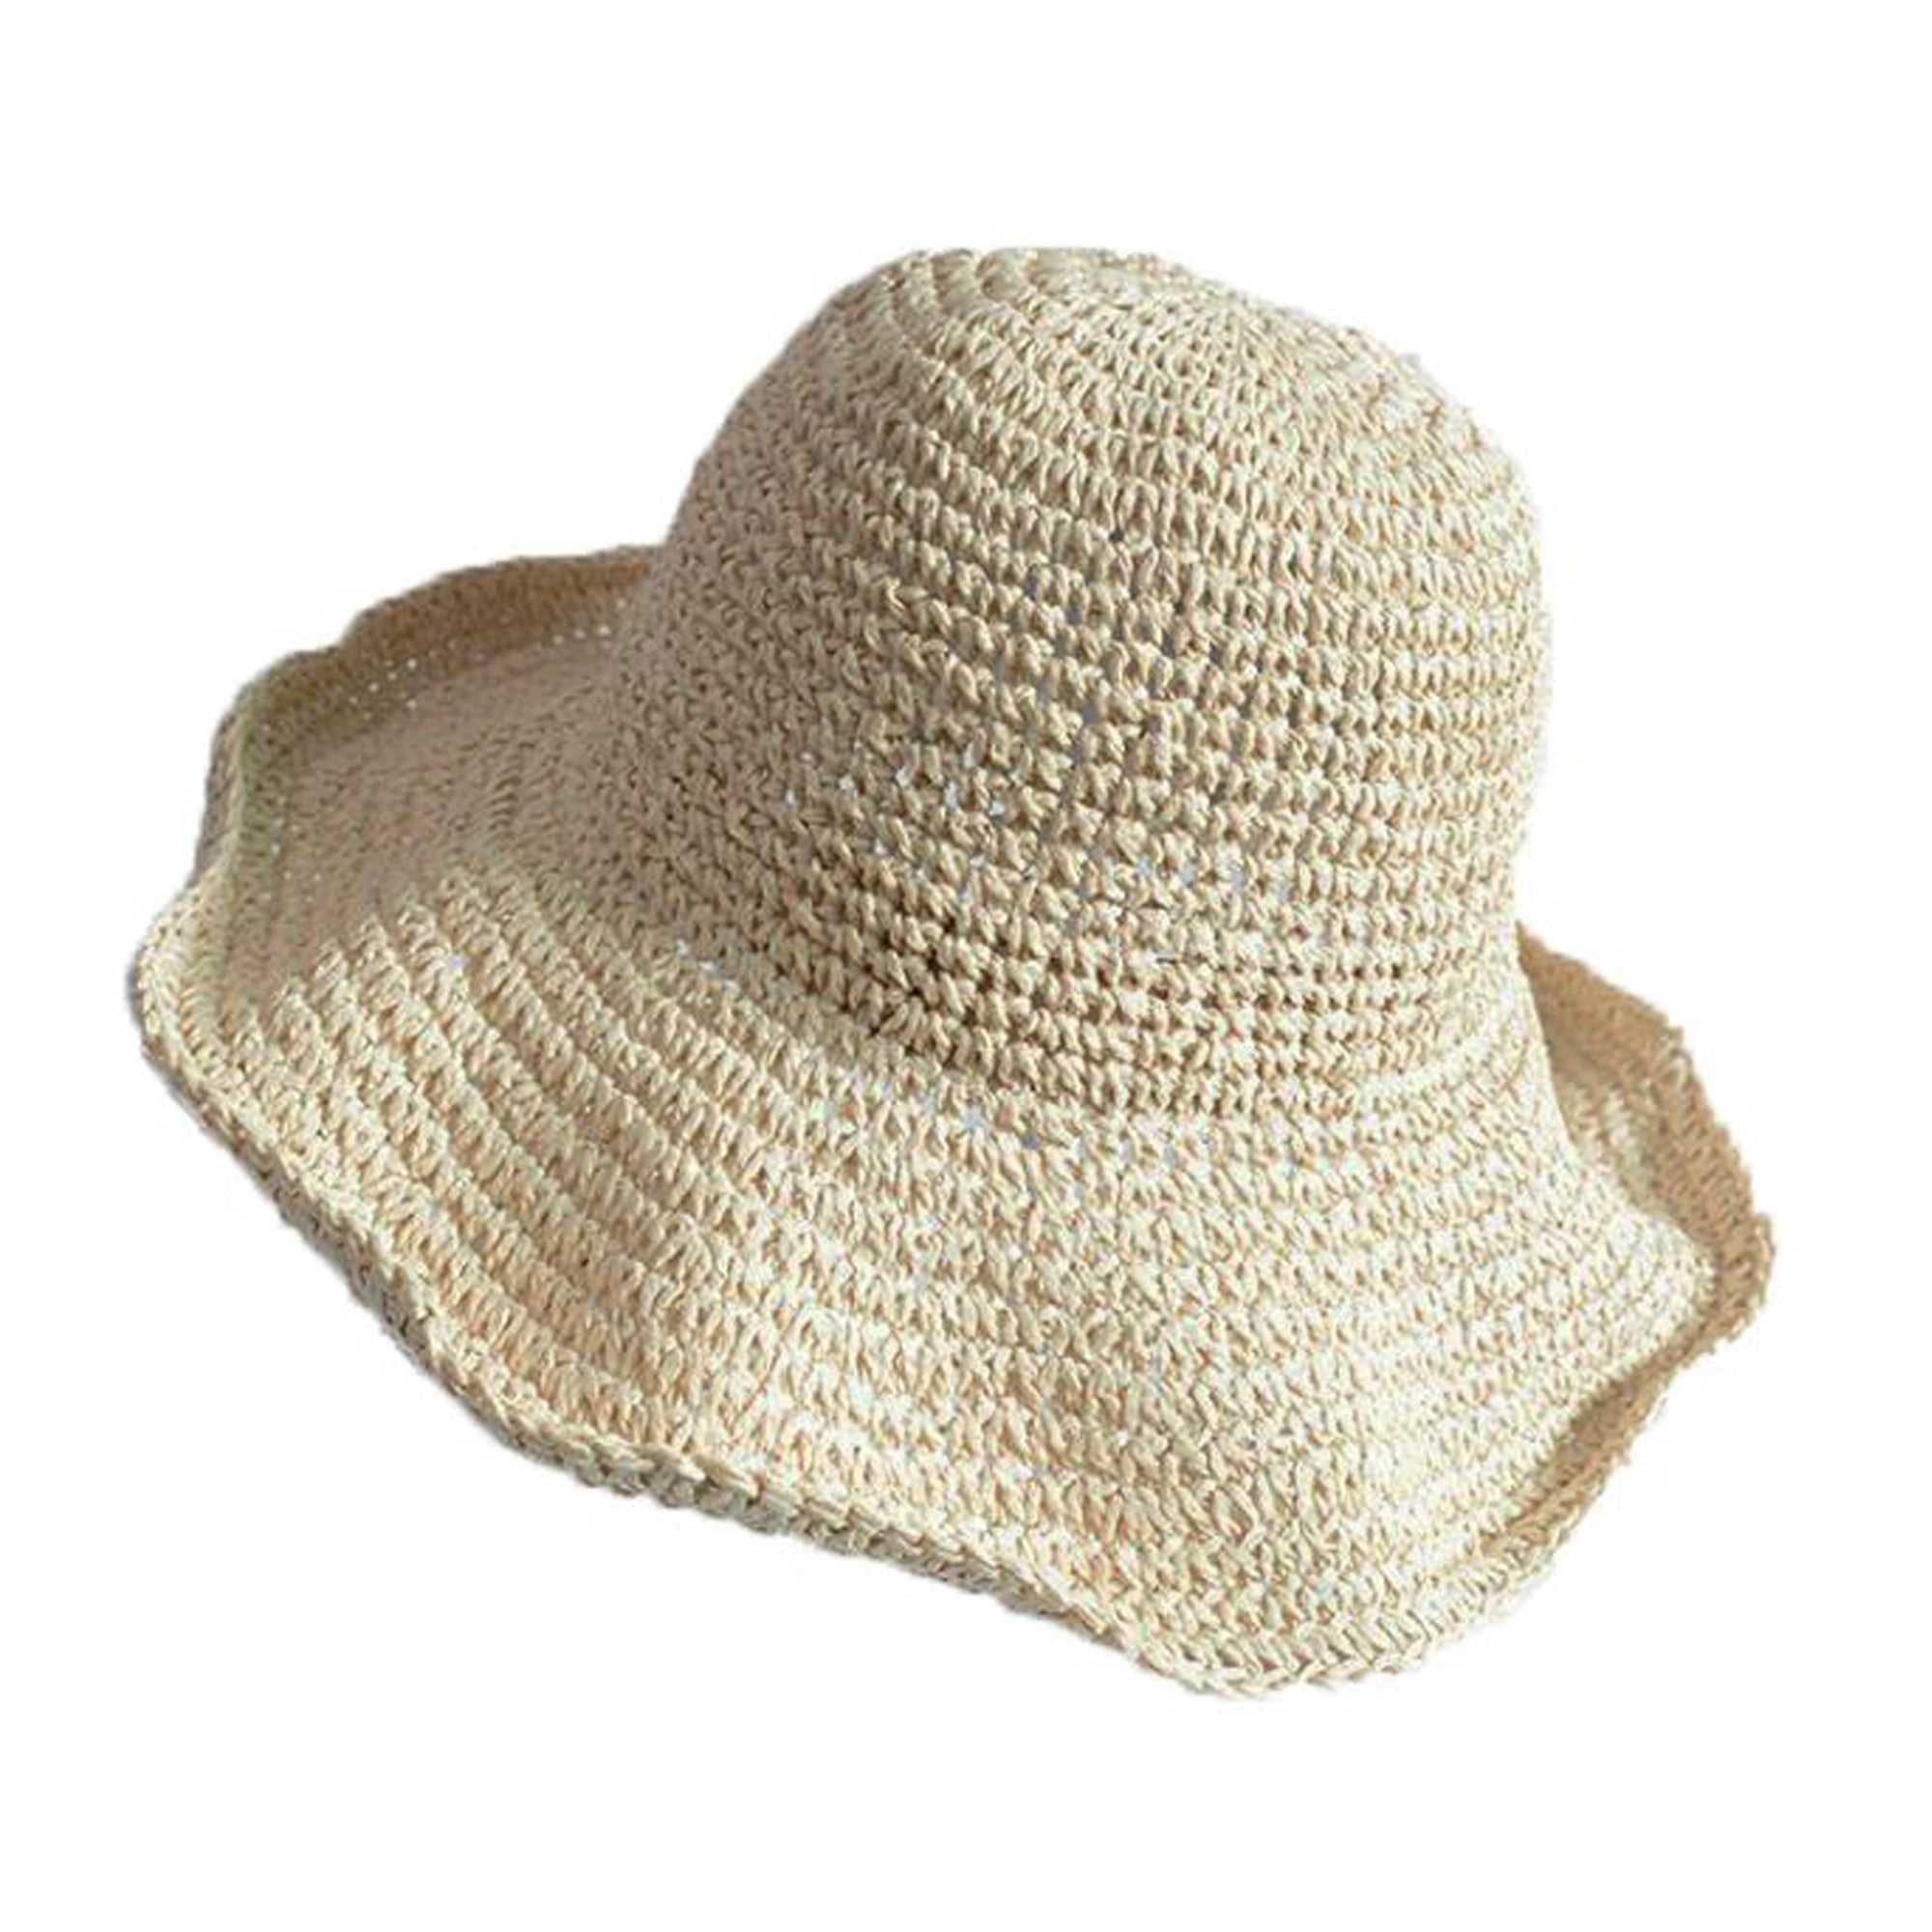 Foldable Brimmed Straw Hat For Women 5 Colors Summer Beach Sun Hats For Ladies